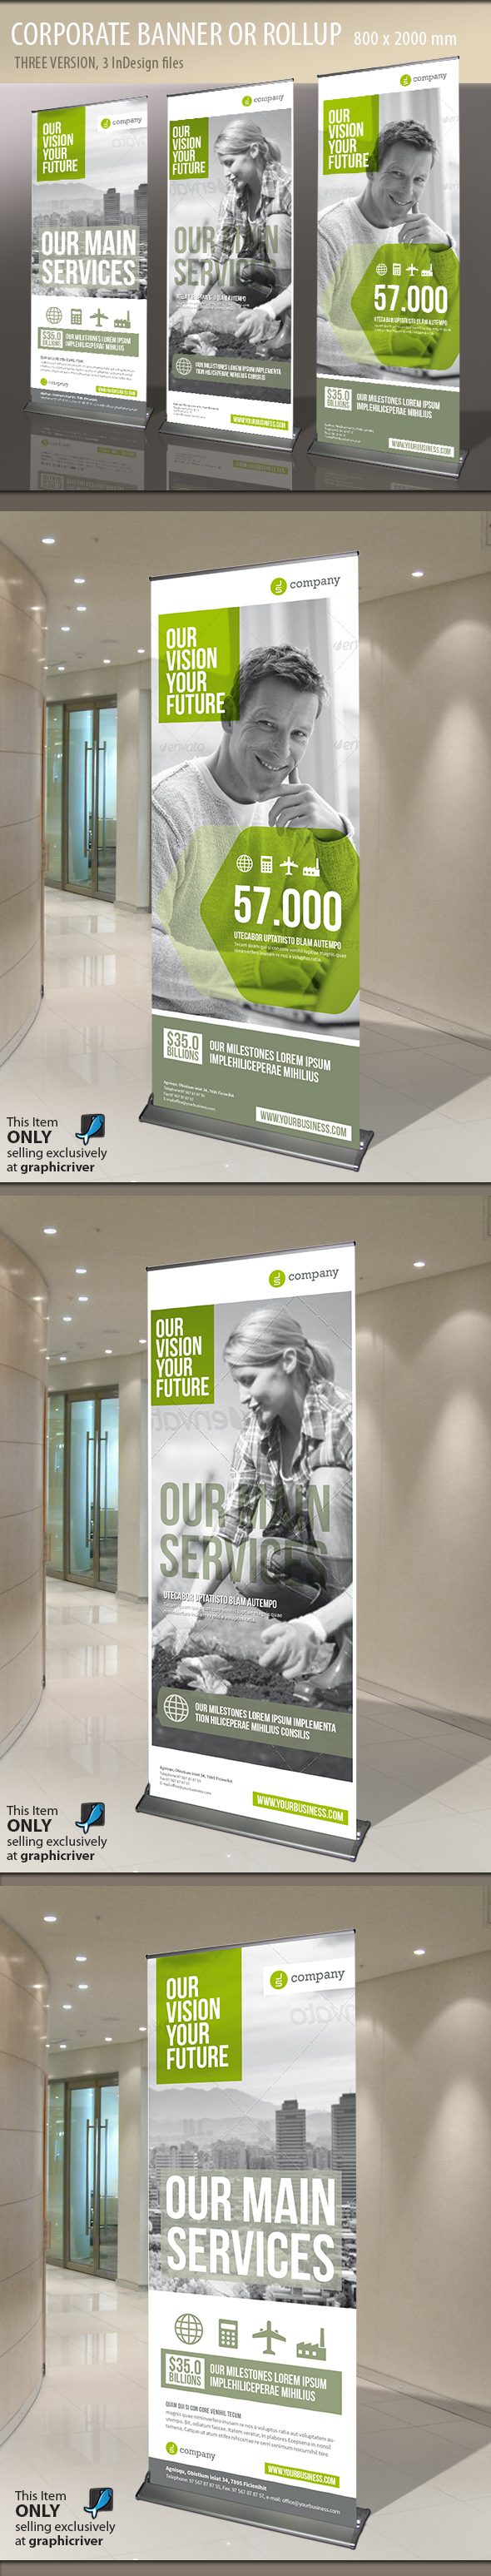 800x2000 banner business corporate Design Templates f.a.q financial graphic graphicriver gray green icons rollup Roll Up Paulnomade